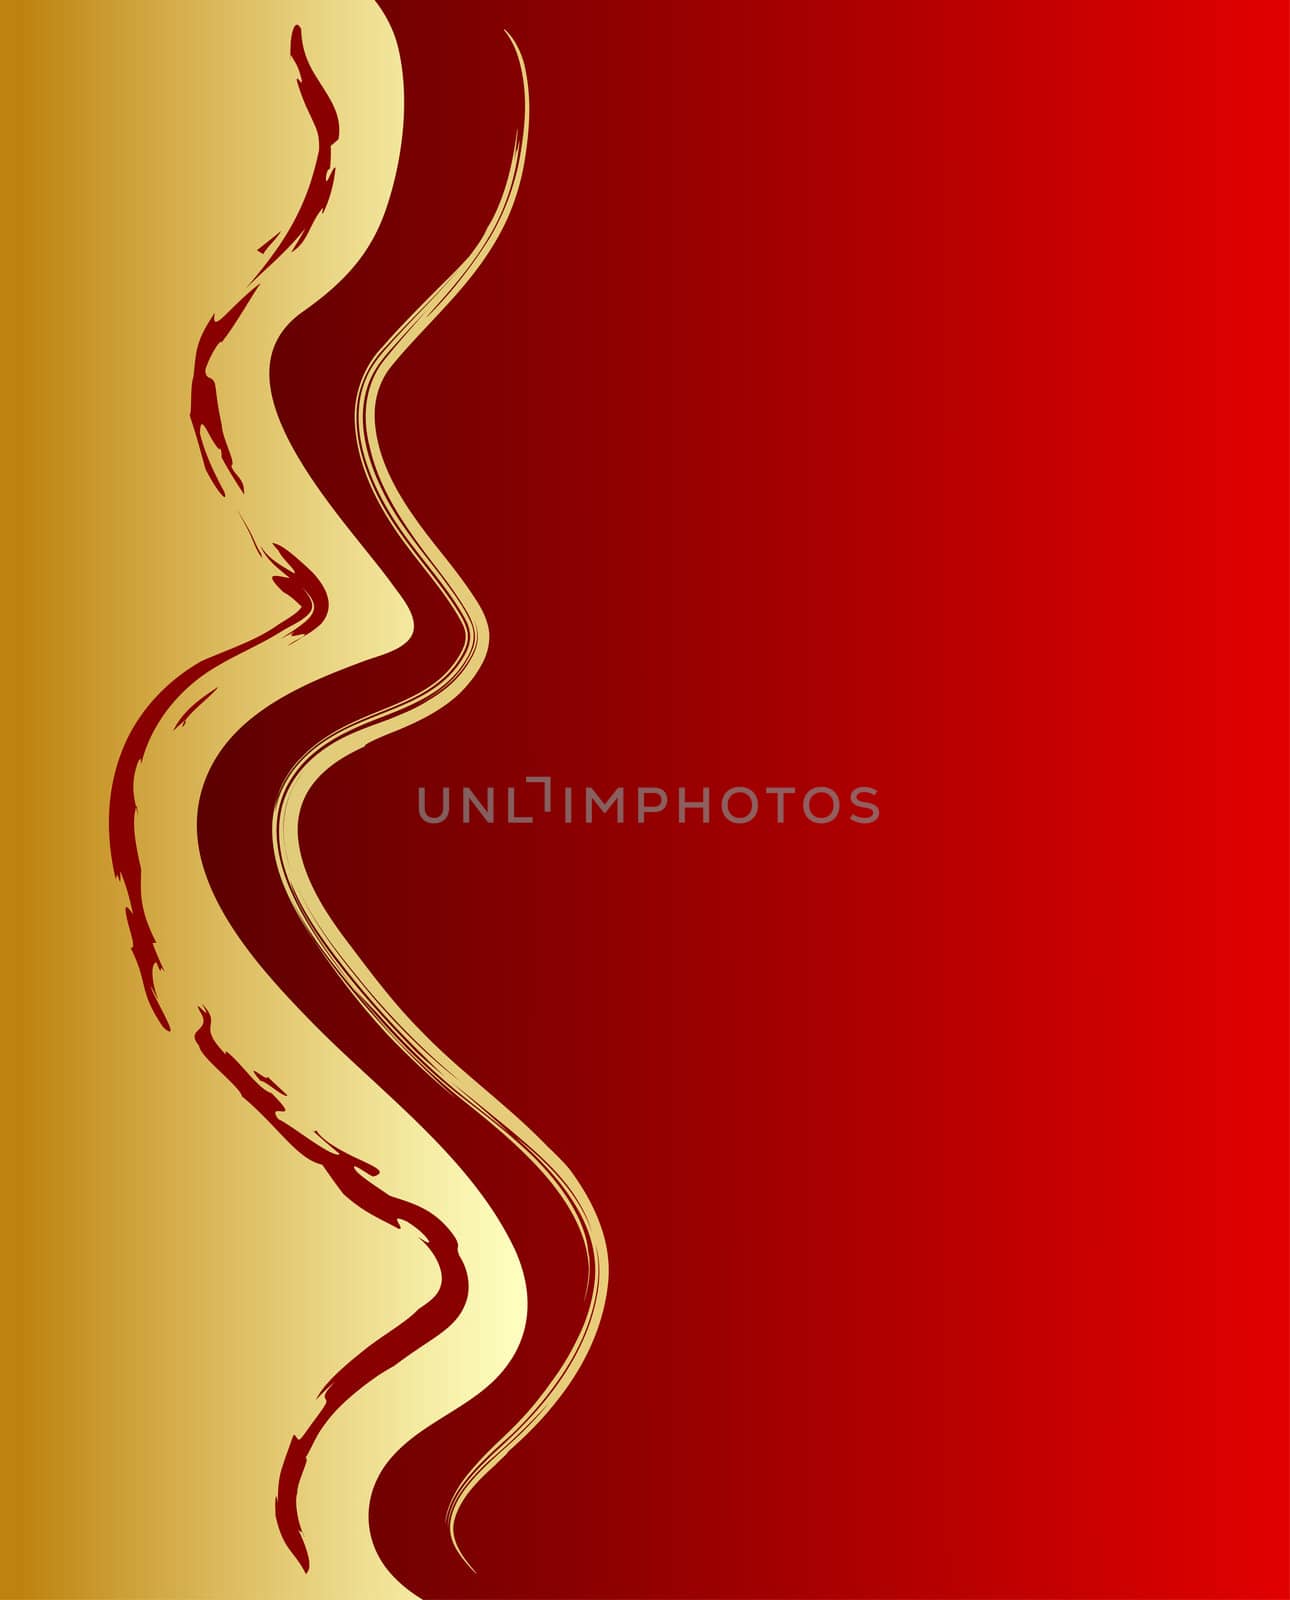 illustration of a red abstract decoration background